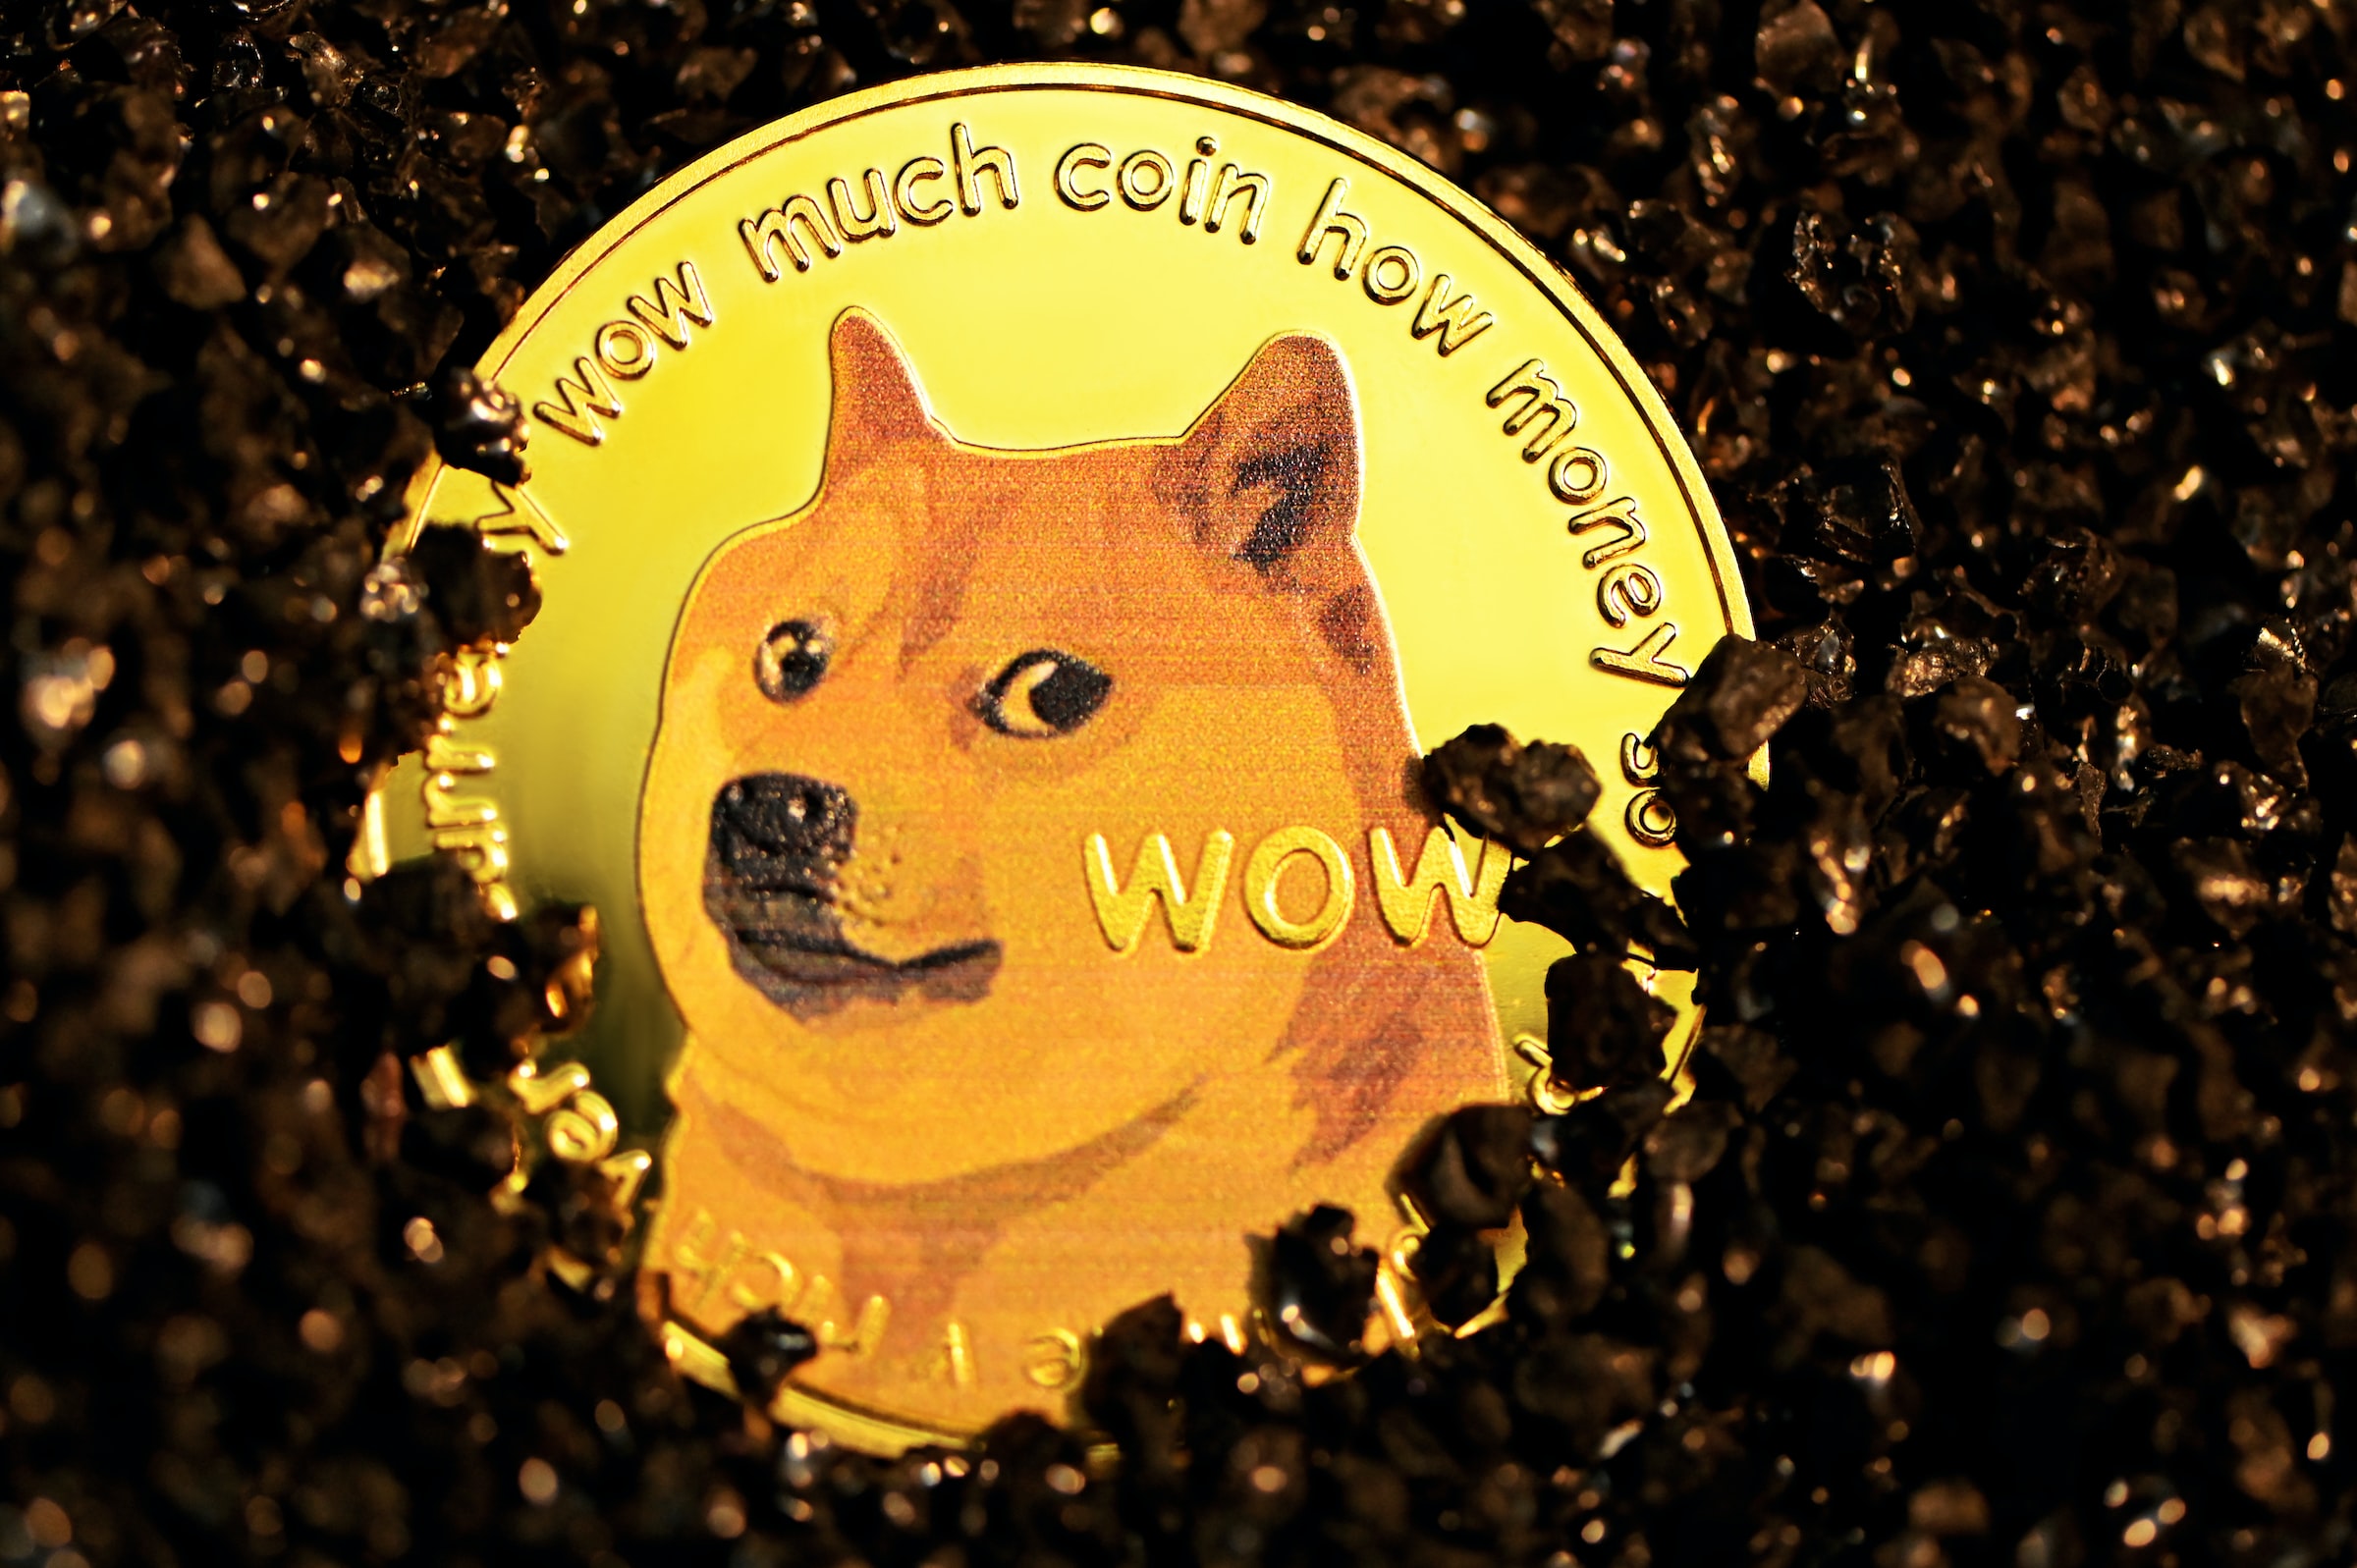 Mysterious Wallet Transfers 1.06T Shiba Inu to Coinbase while SHIB Price Falls